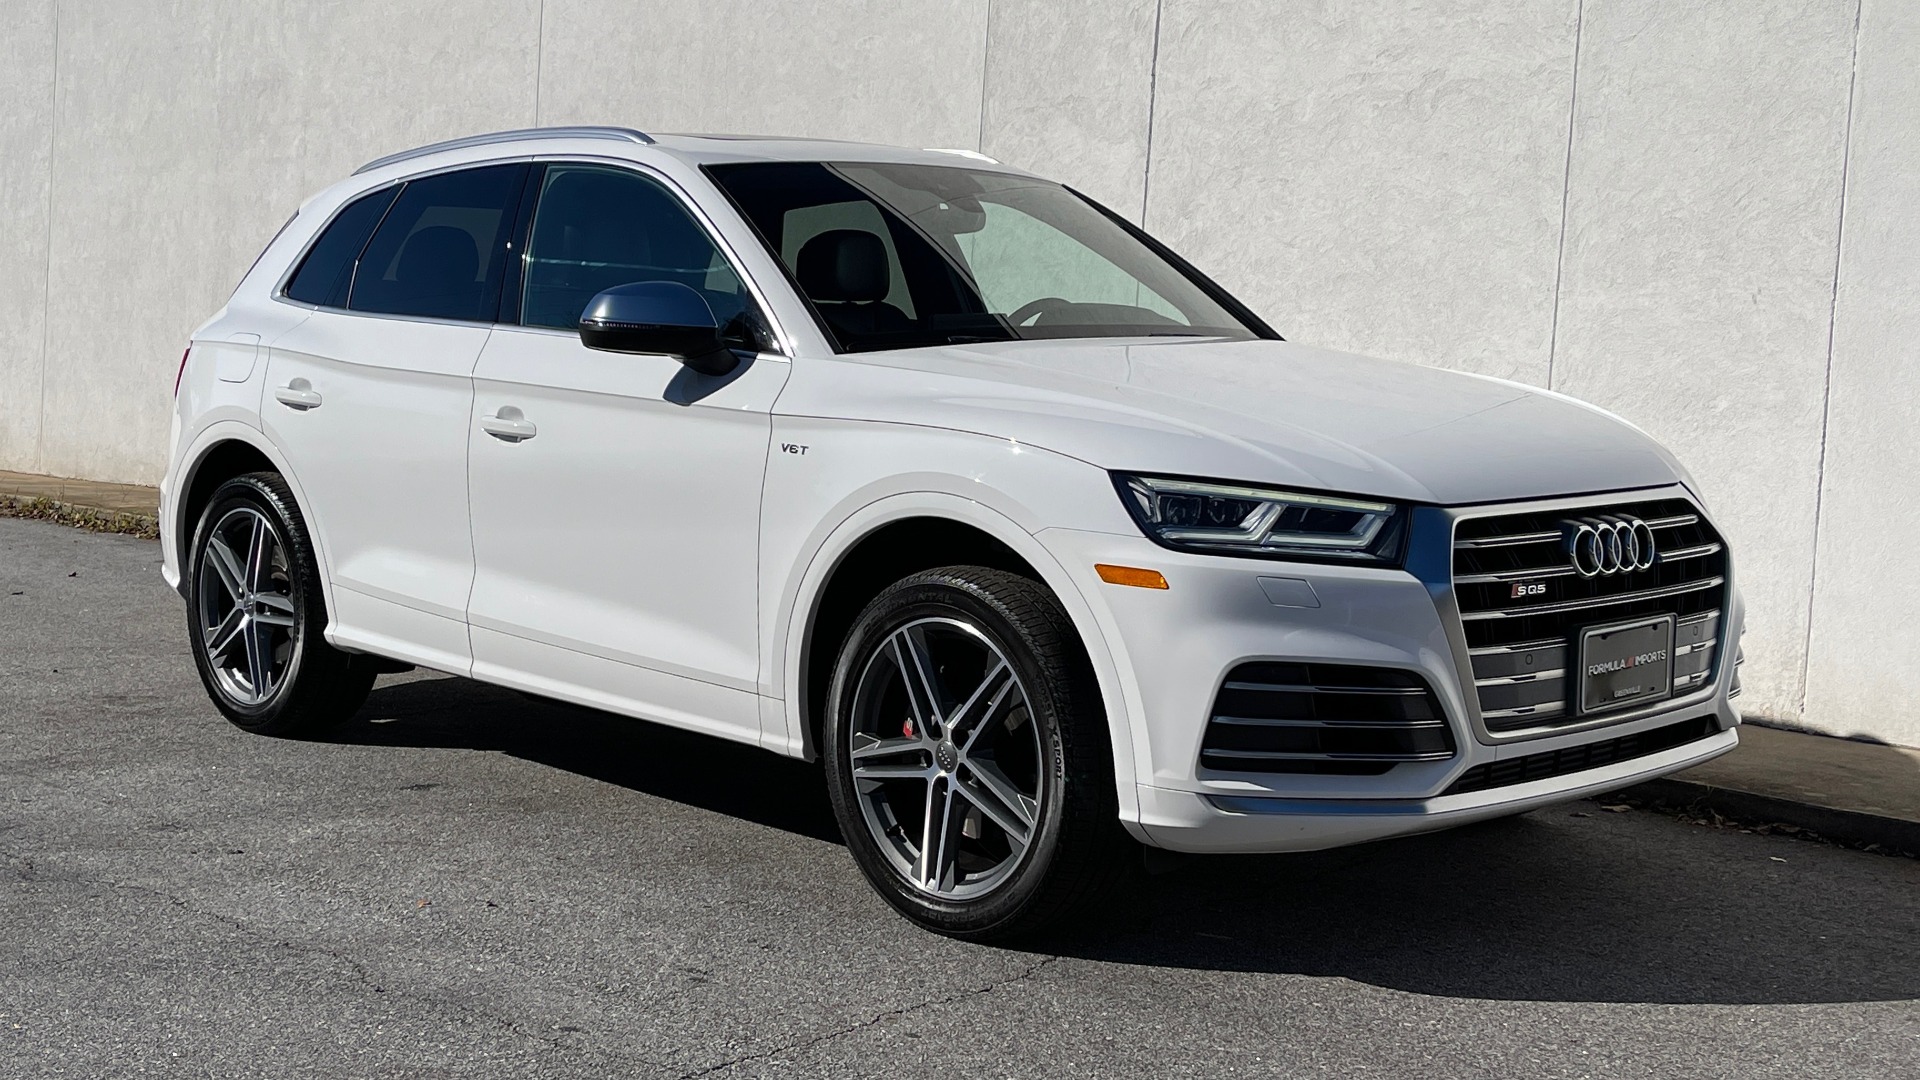 Used 2018 Audi SQ5 PREMIUM PLUS / NAV / SUNROOF / 12.3IN SCREEN / REARVIEW for sale Sold at Formula Imports in Charlotte NC 28227 5